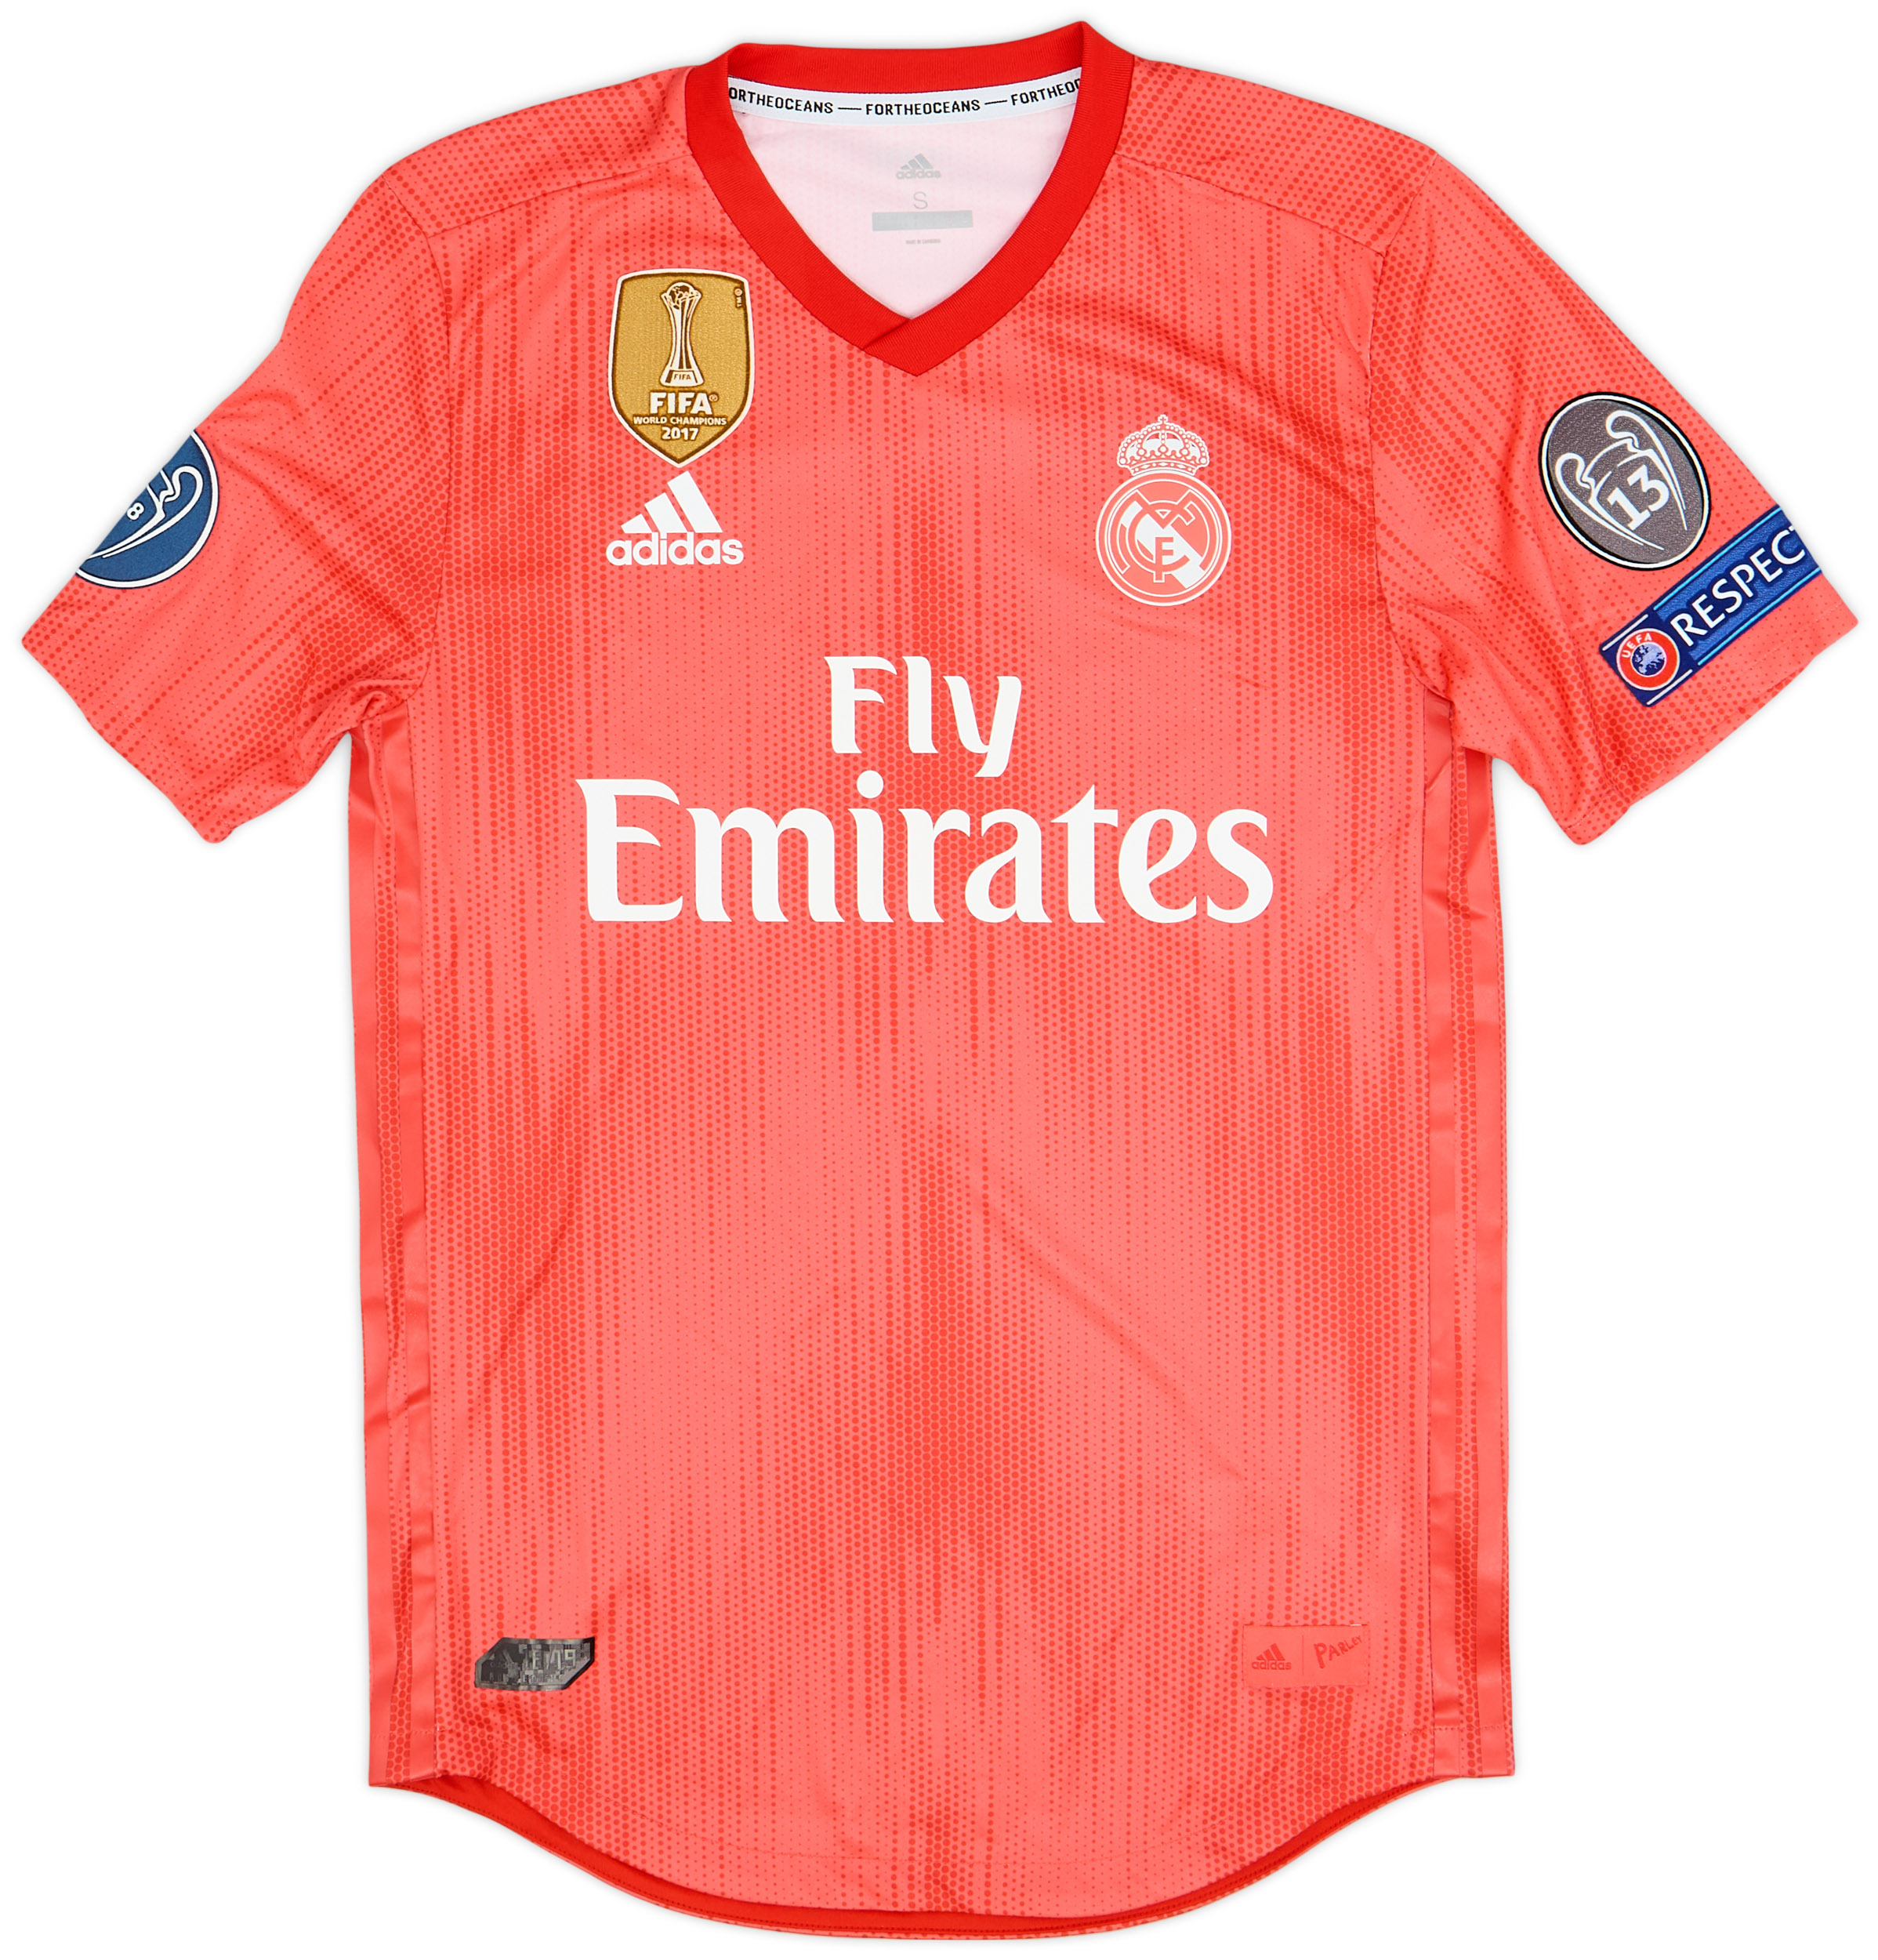 2018-19 Real Madrid Authentic Third Shirt - 9/10 - ()